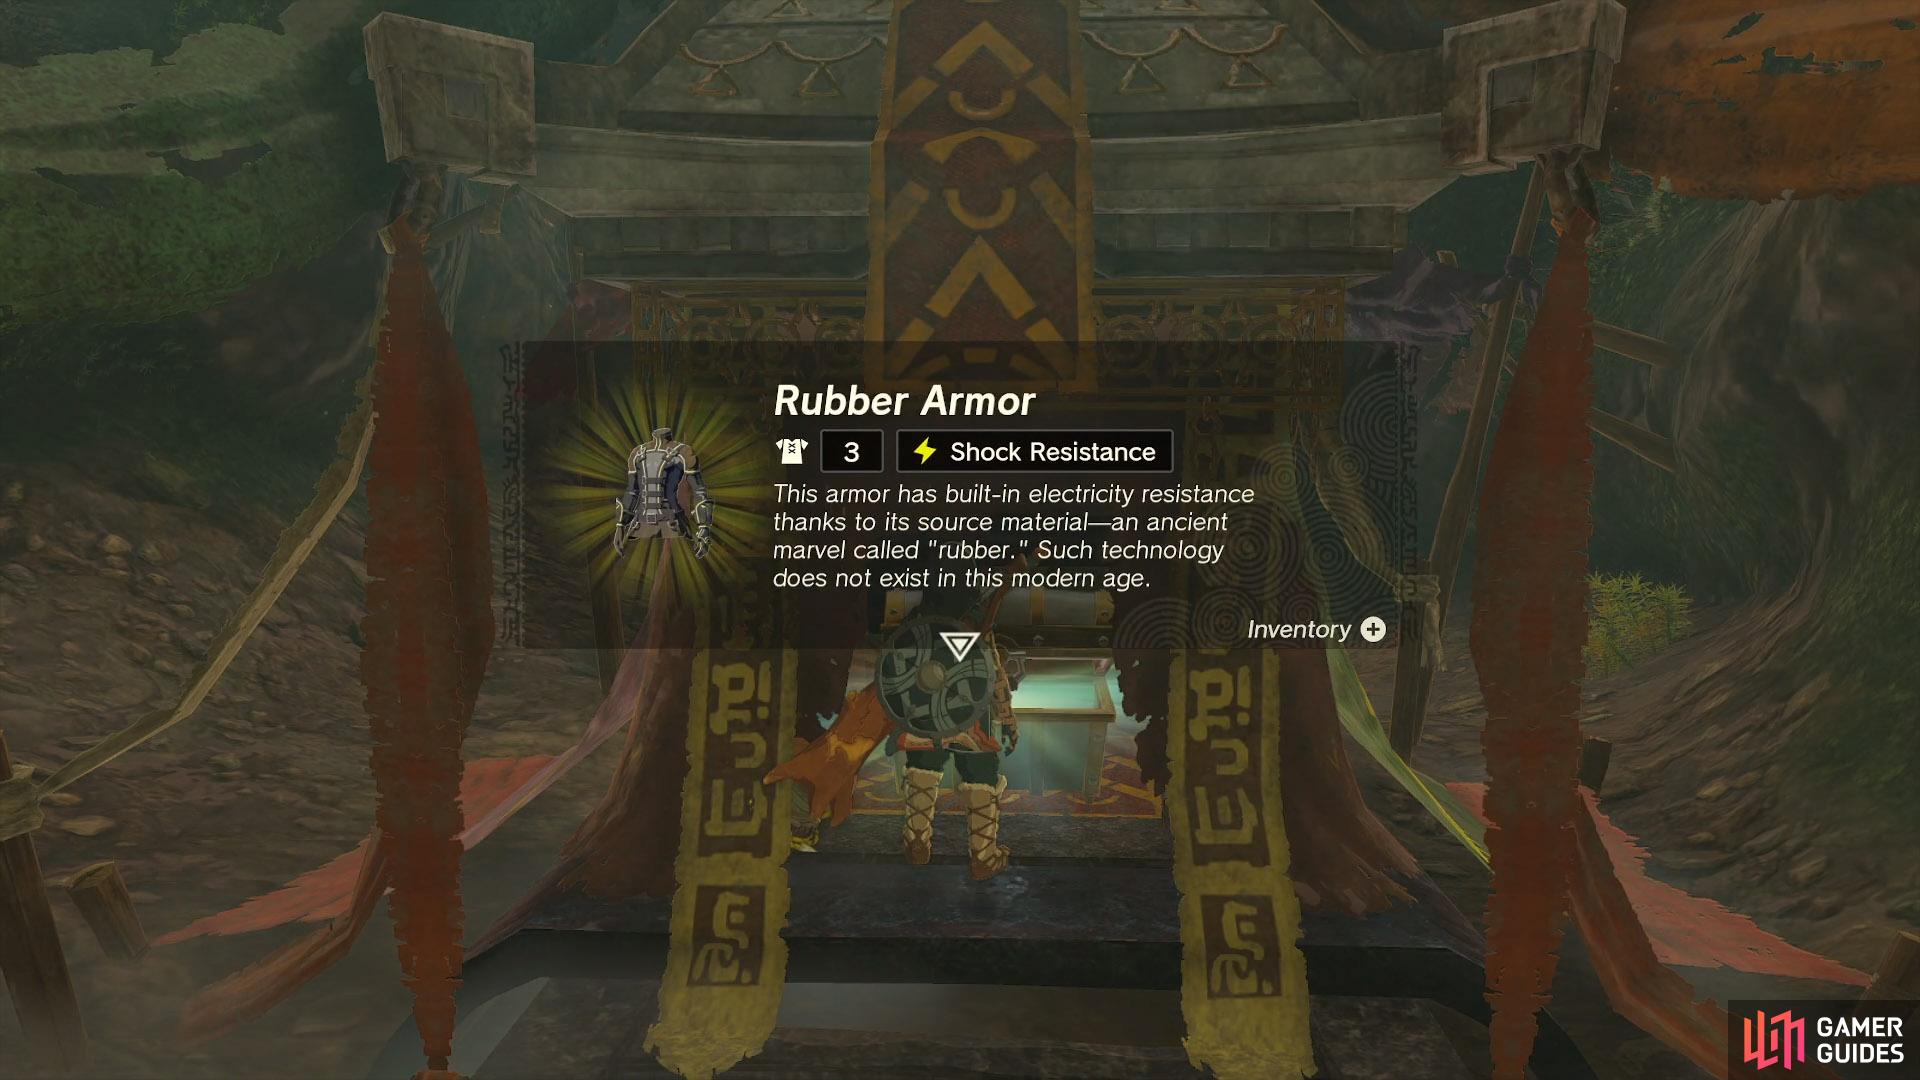 Getting the Rubber Armor from the chest